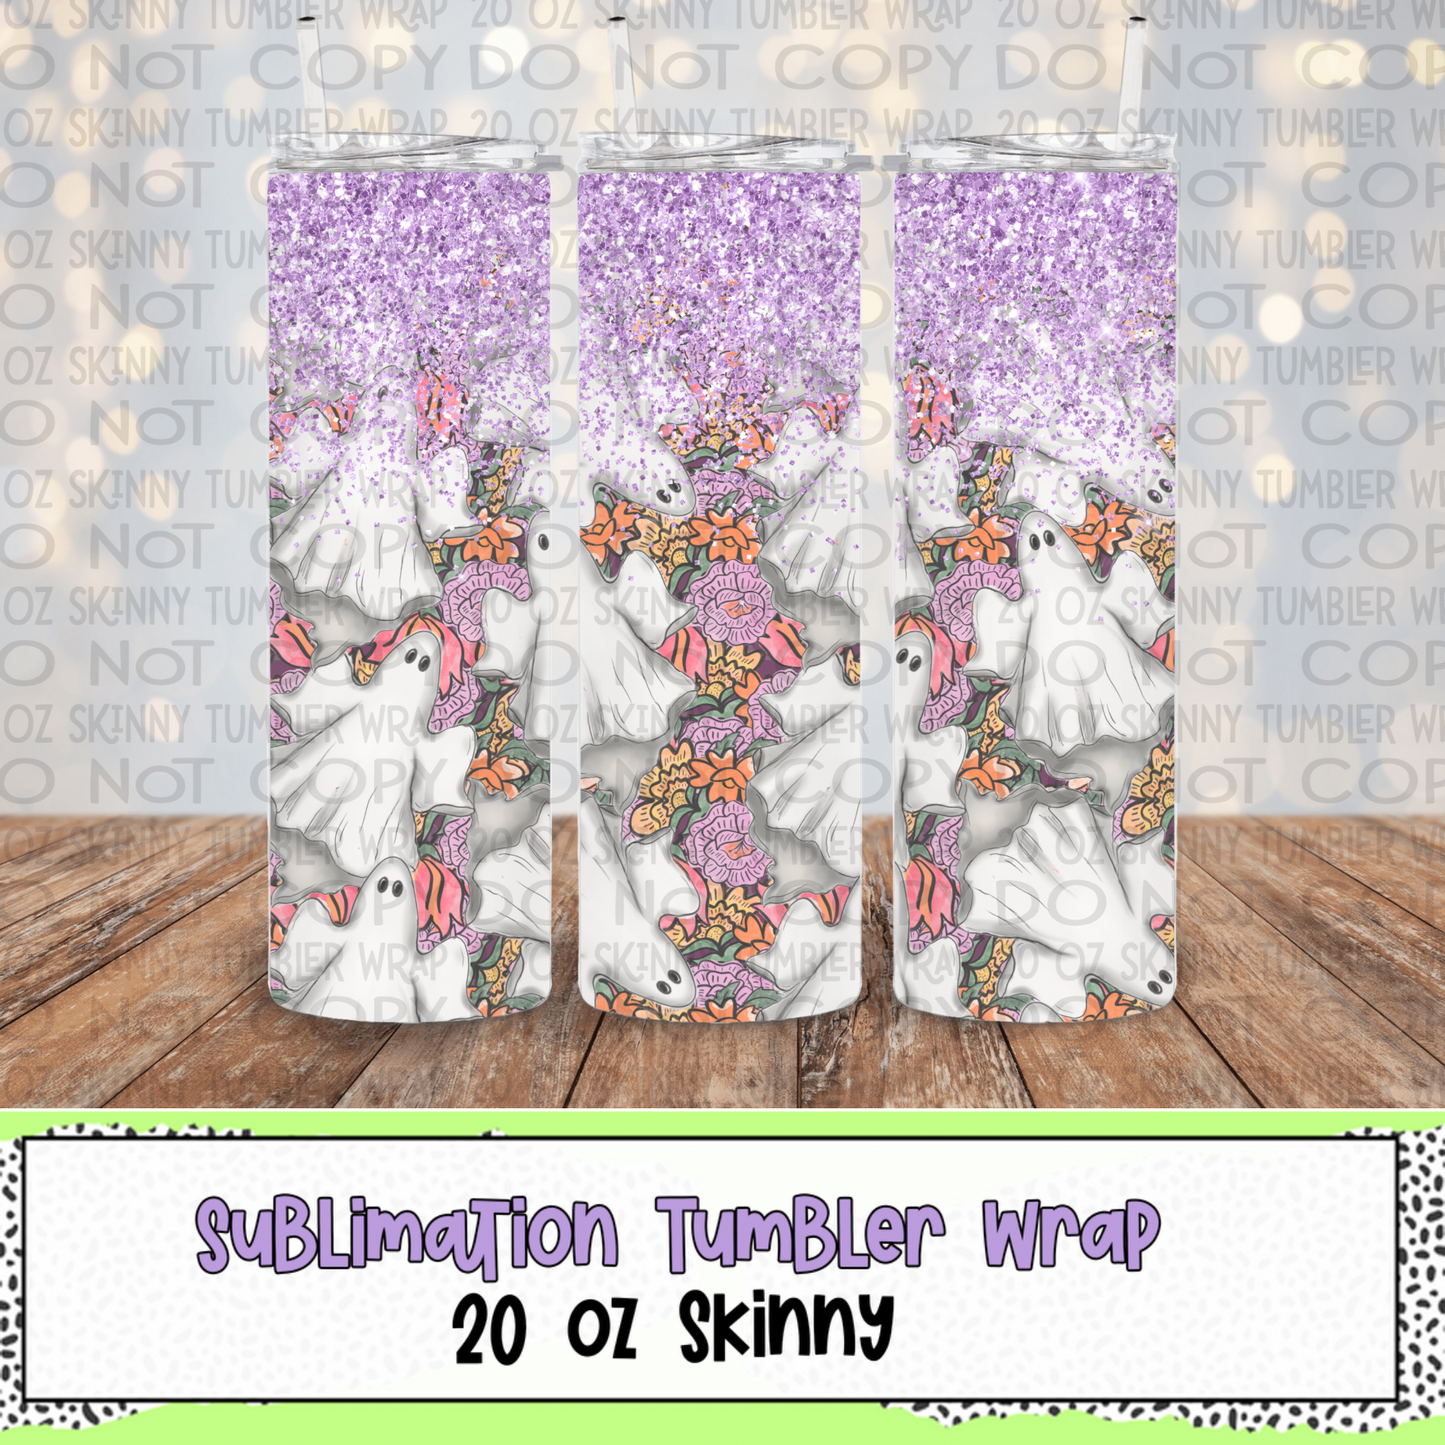 Floral Ghosts 20 Oz Skinny Tumbler Wrap - Sublimation Transfer - RTS